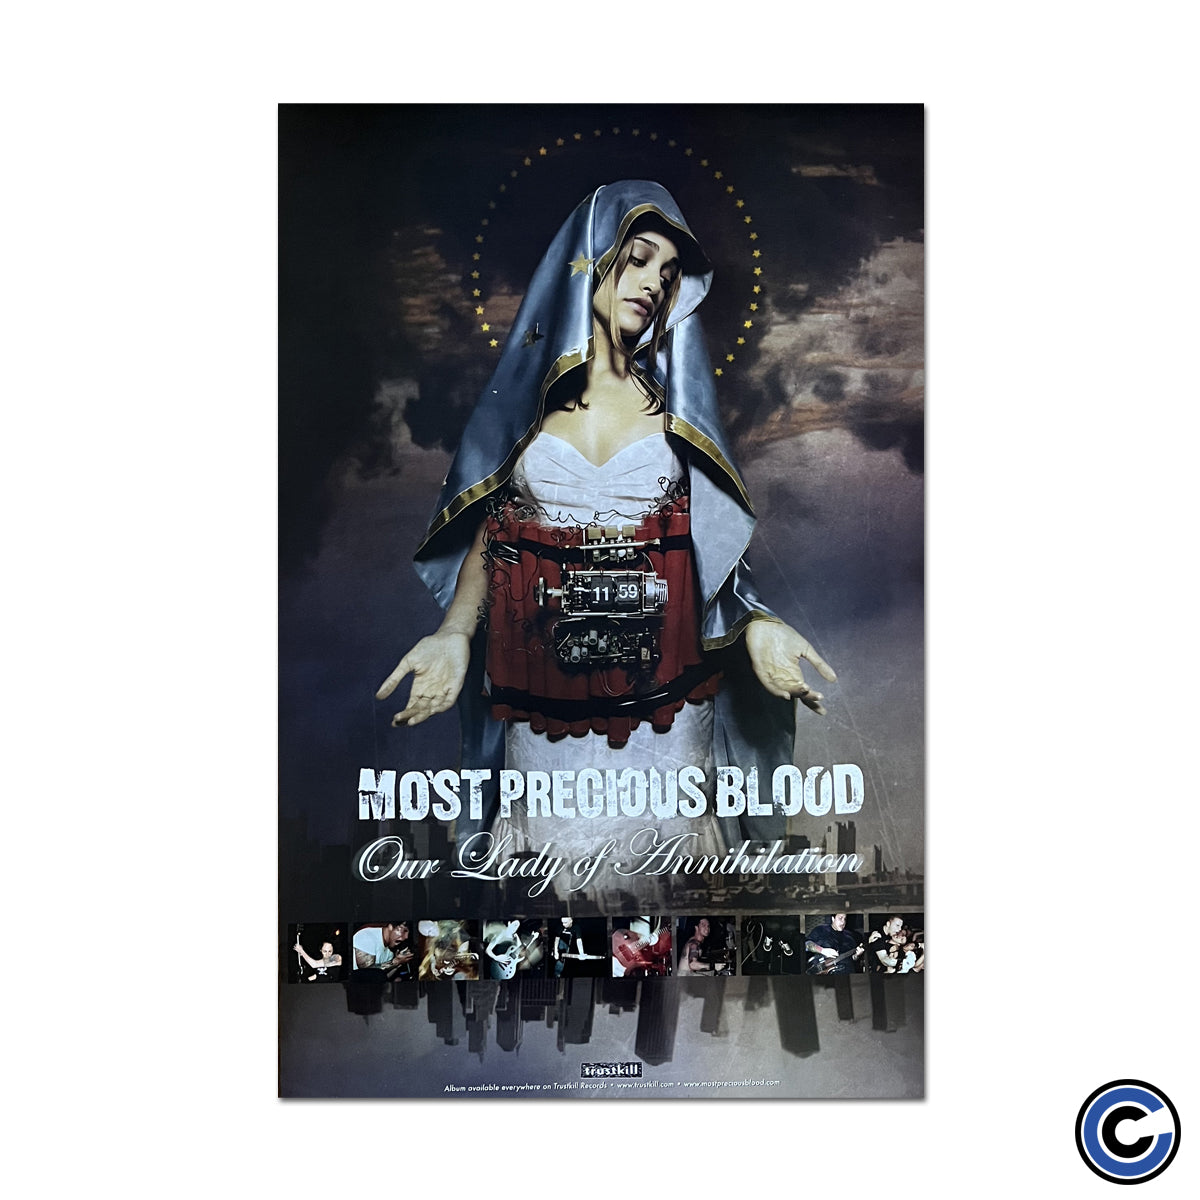 Most Precious Blood "Our Lady Of Annihilation" Poster